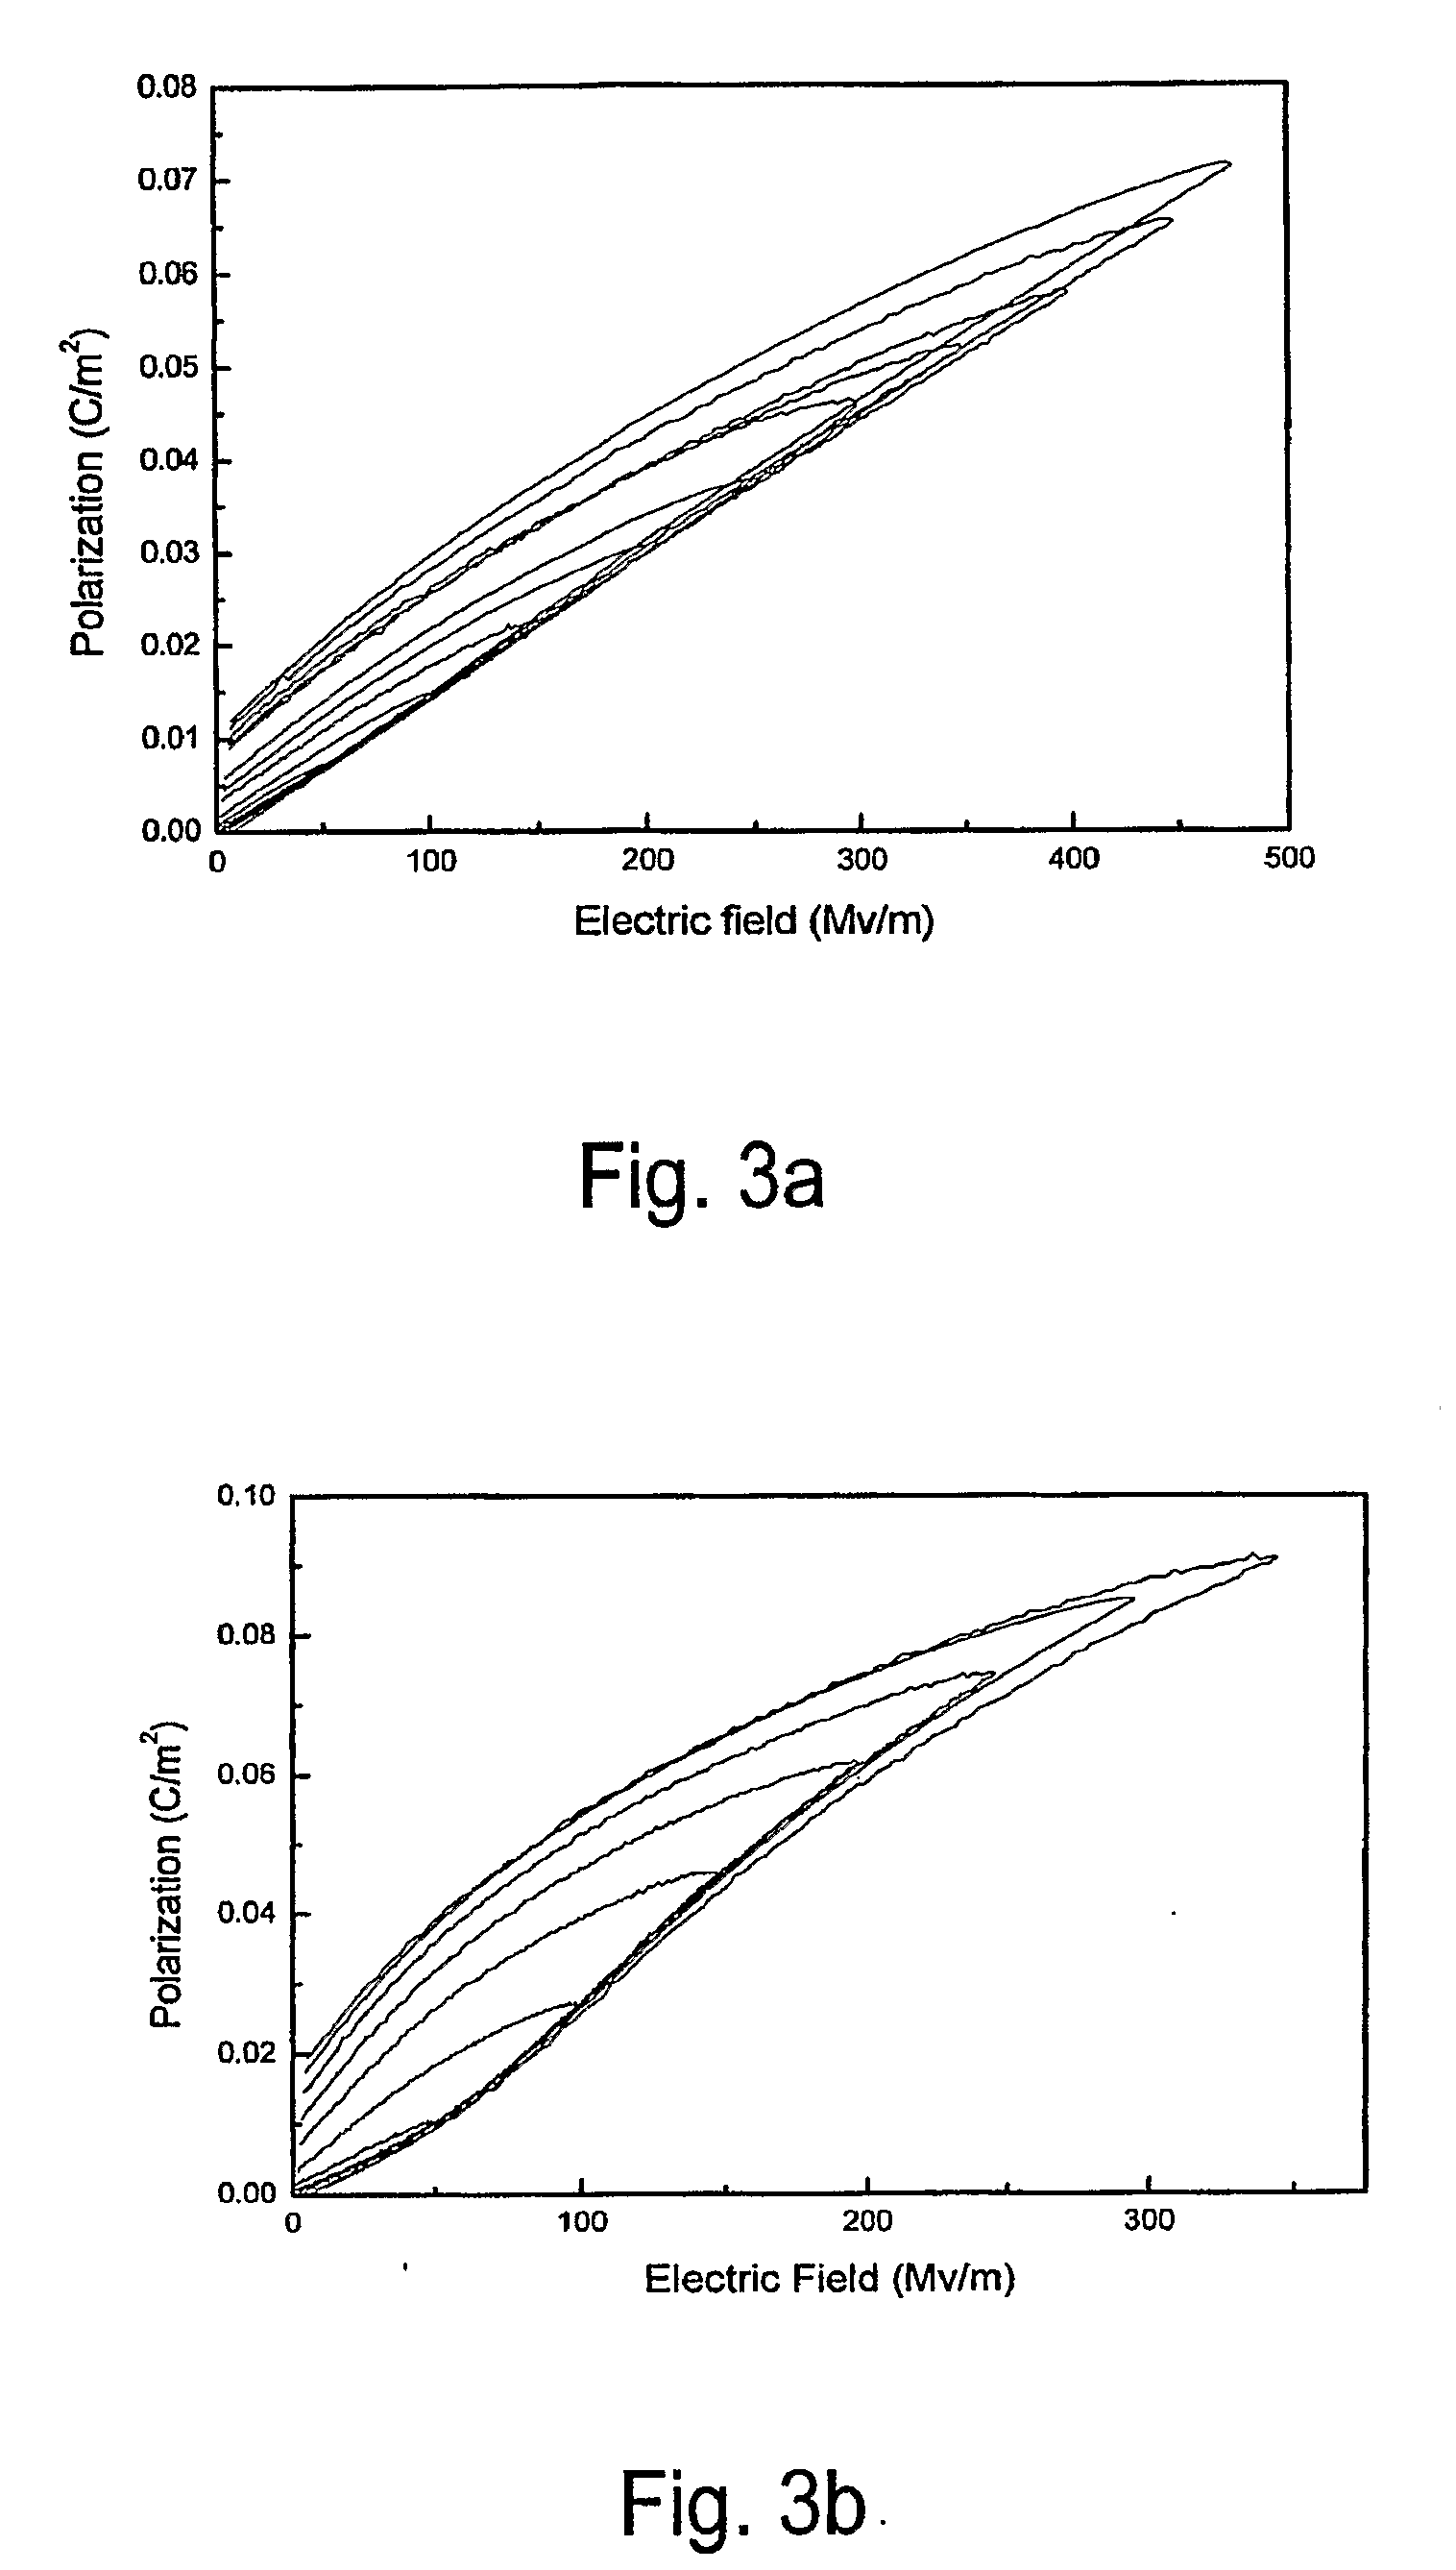 High Electric Energy Density Polymer Capacitors With Fast Discharge Speed and High Efficiency Based On Unique Poly (Vinylidene Fluoride) Copolymers and Terpolymers as Dielectric Materials